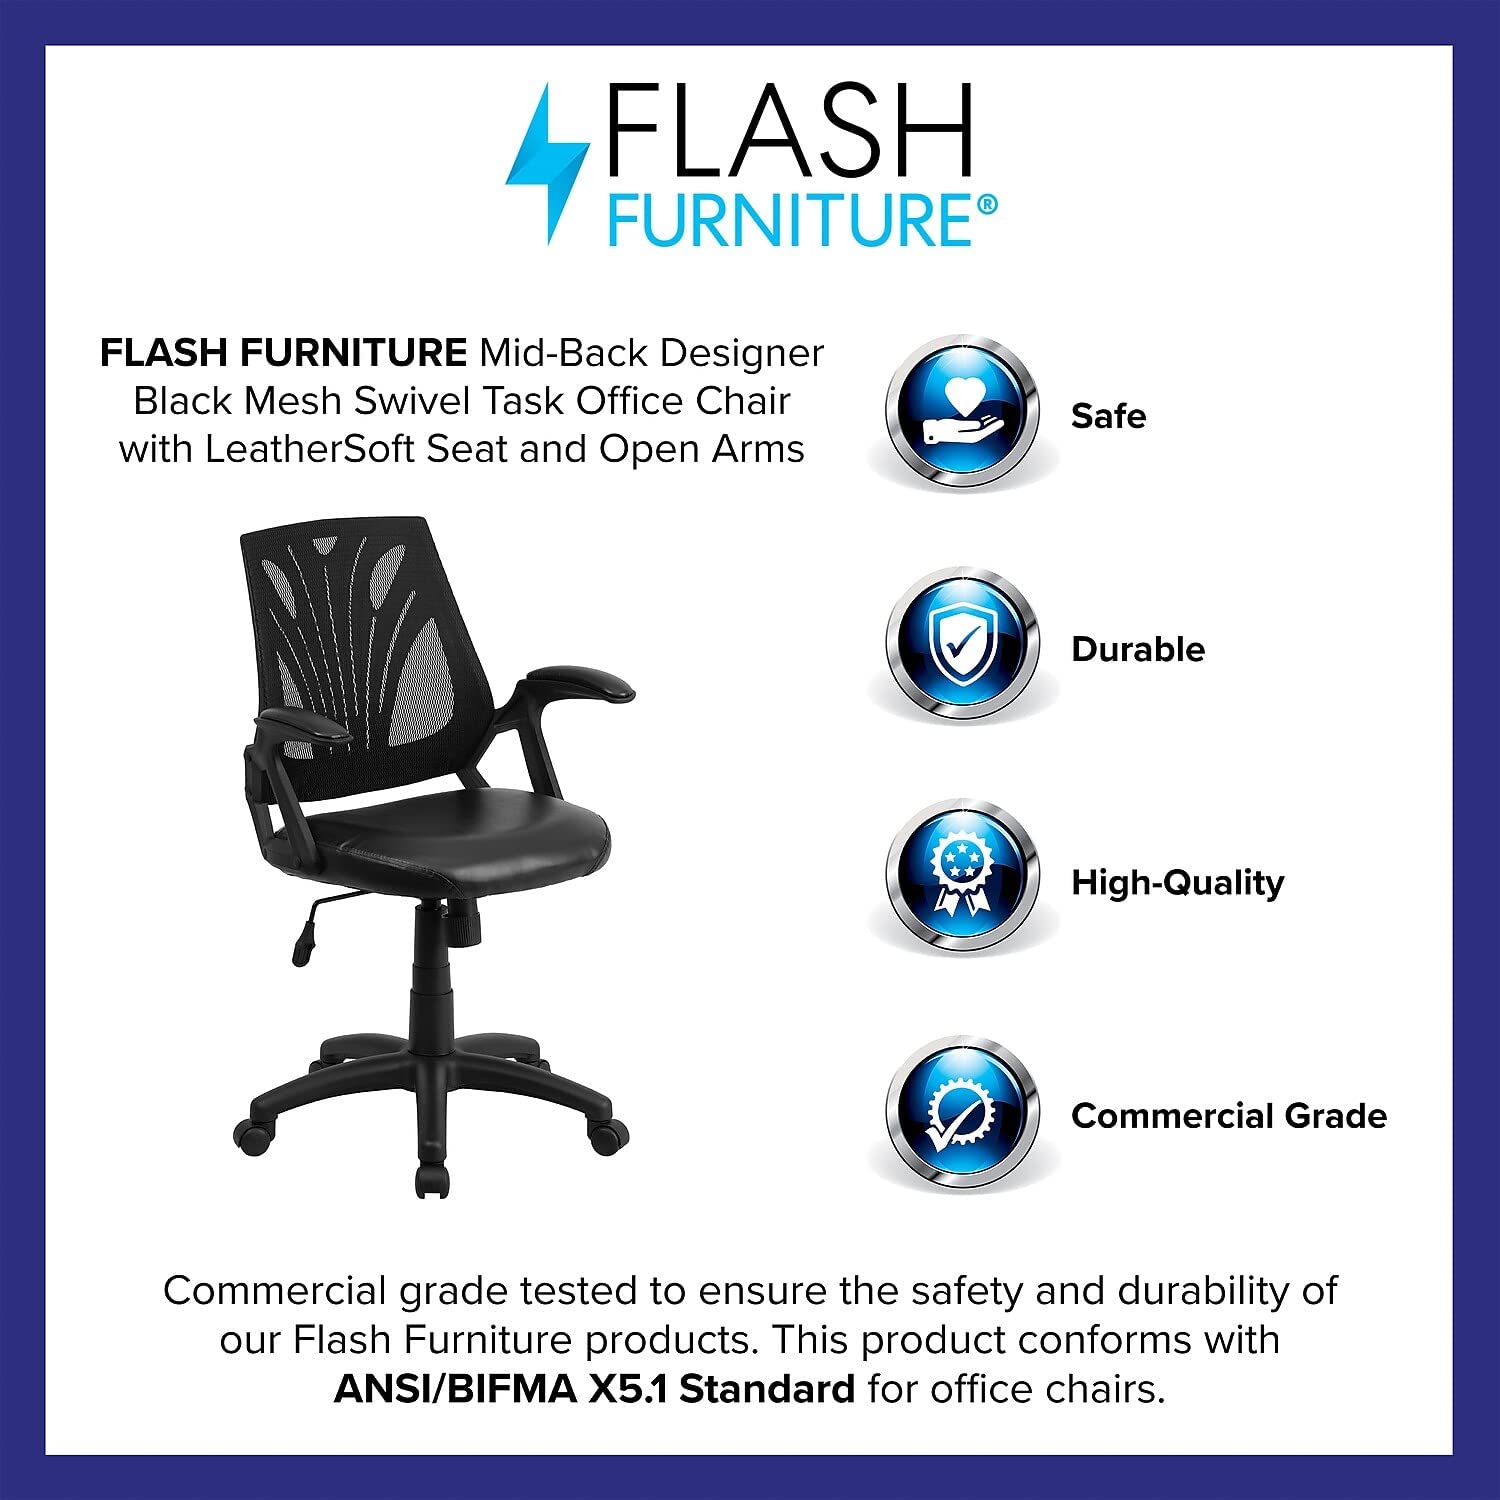 Flash Furniture Mid-Back Designer Black Mesh Swivel Task Office Chair with LeatherSoft Seat and Open Arms